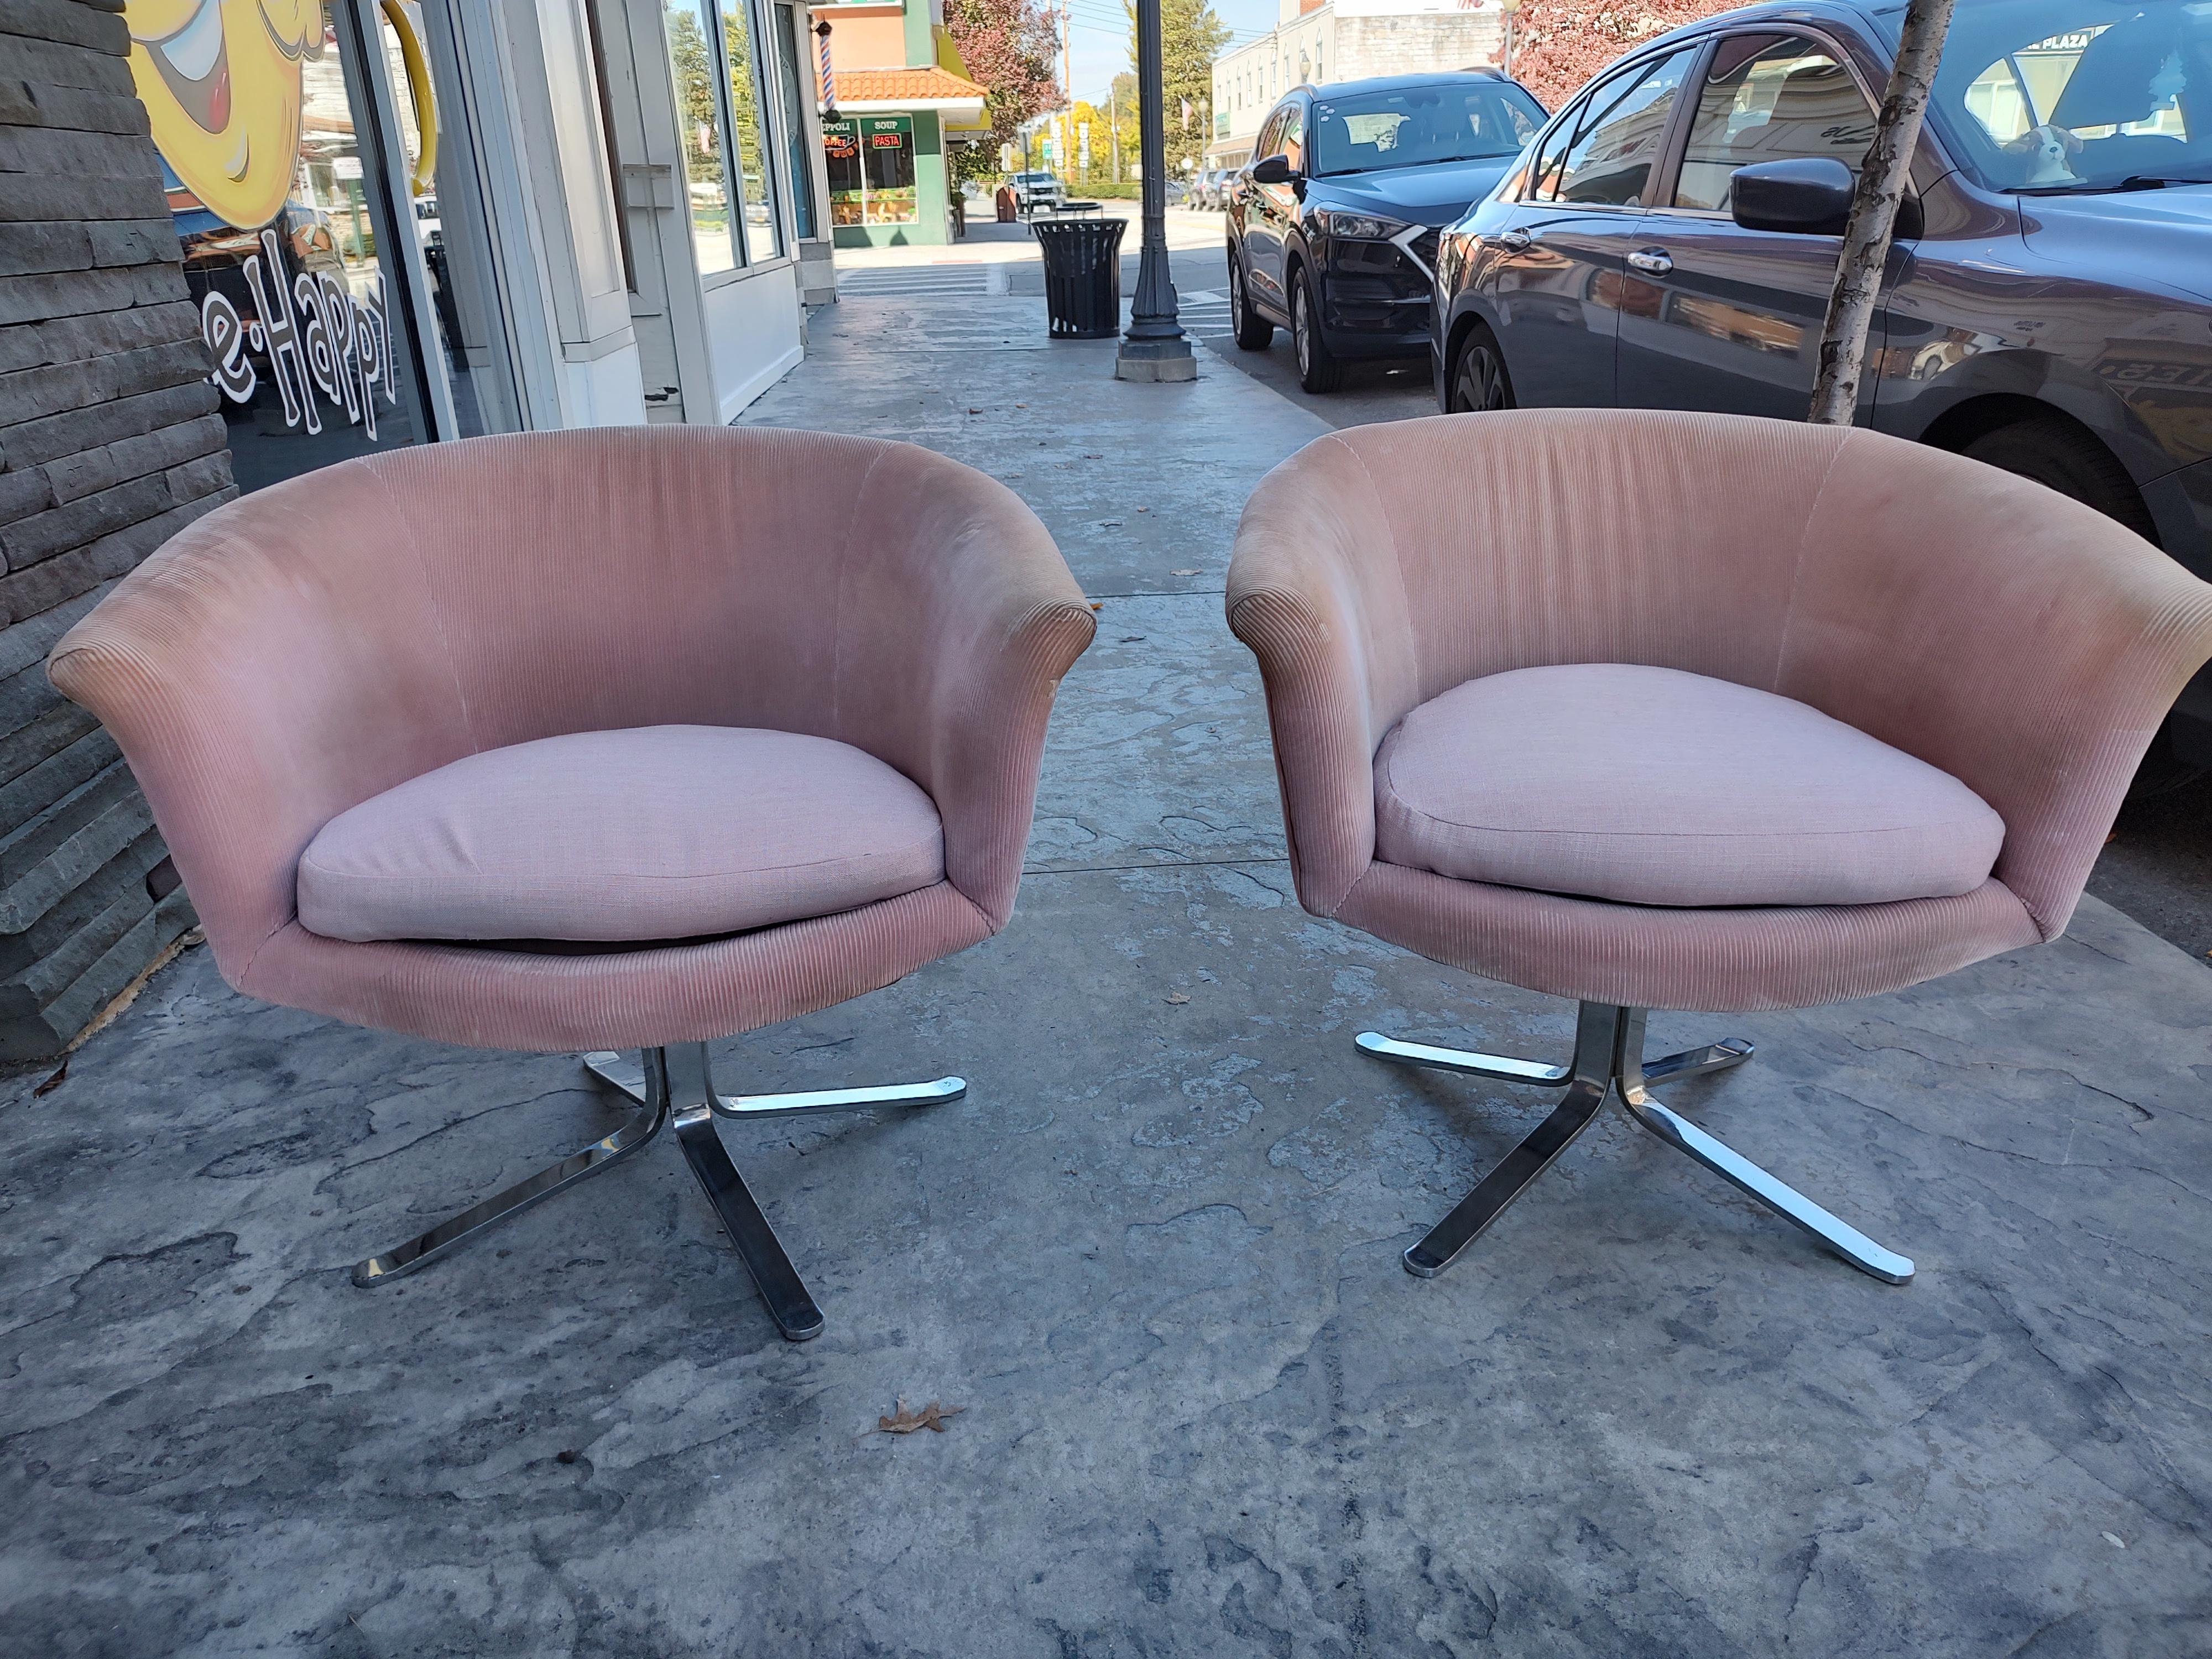 Pair of Mid-Century Modern Swiveling Lounge Barrell Back Club Chairs, C1960 For Sale 7